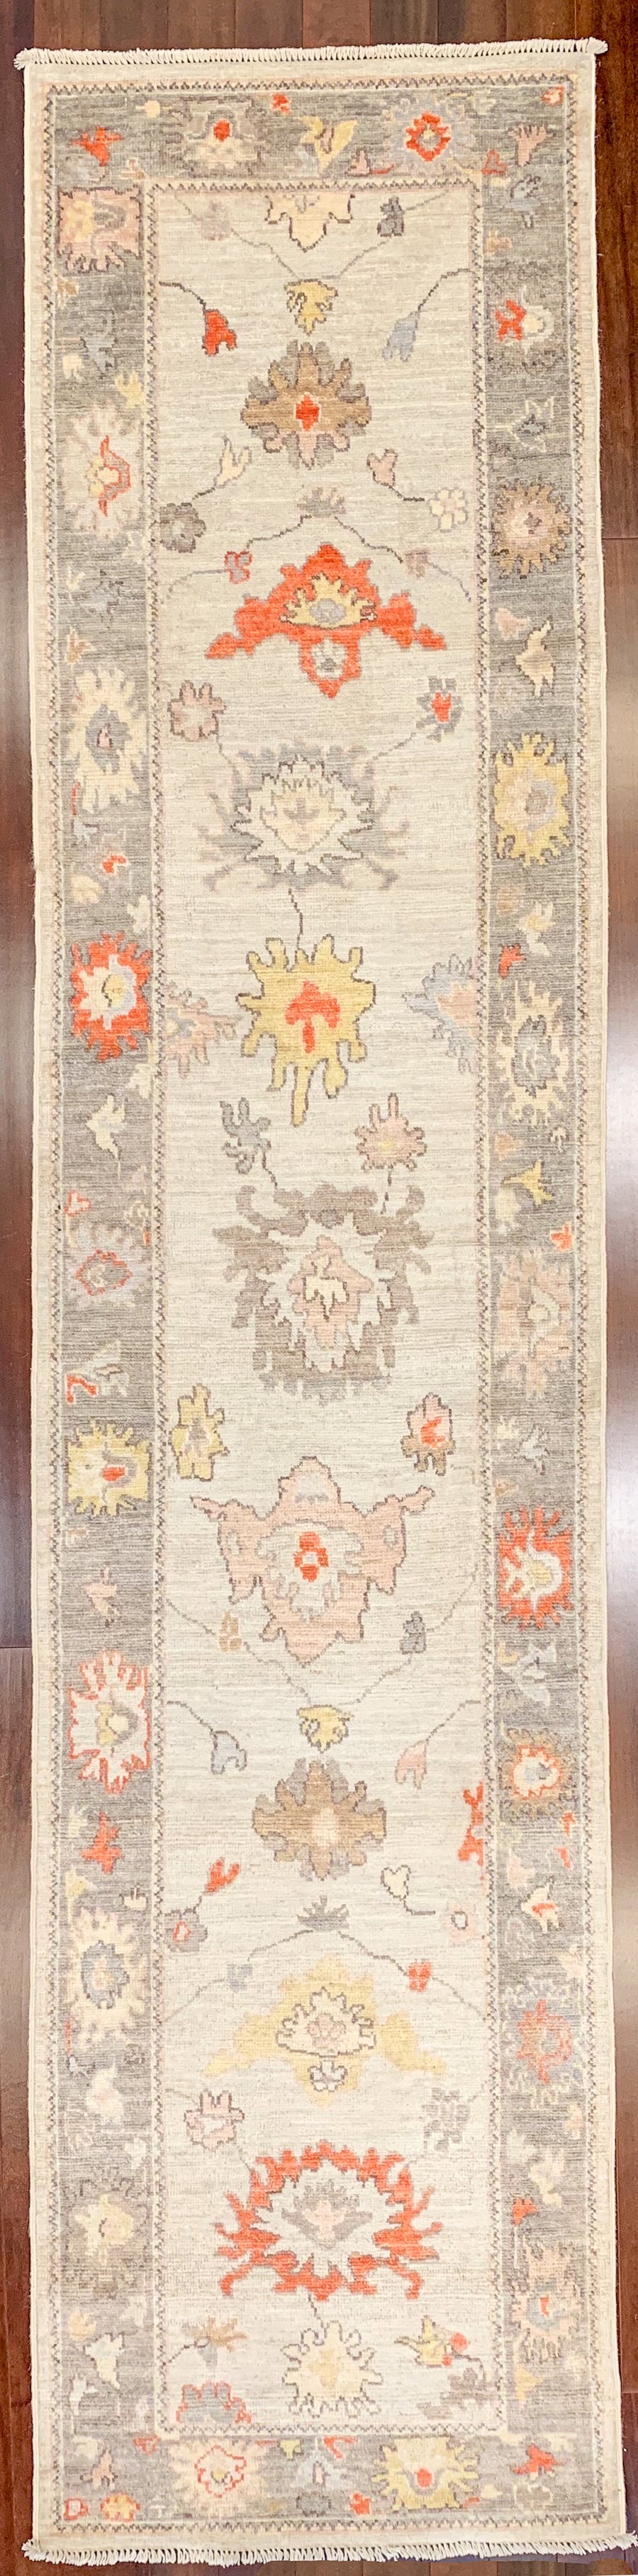 Oushak or Ushak style hall runner rug using pastel blue, red, golden yellow, and purple grey colors